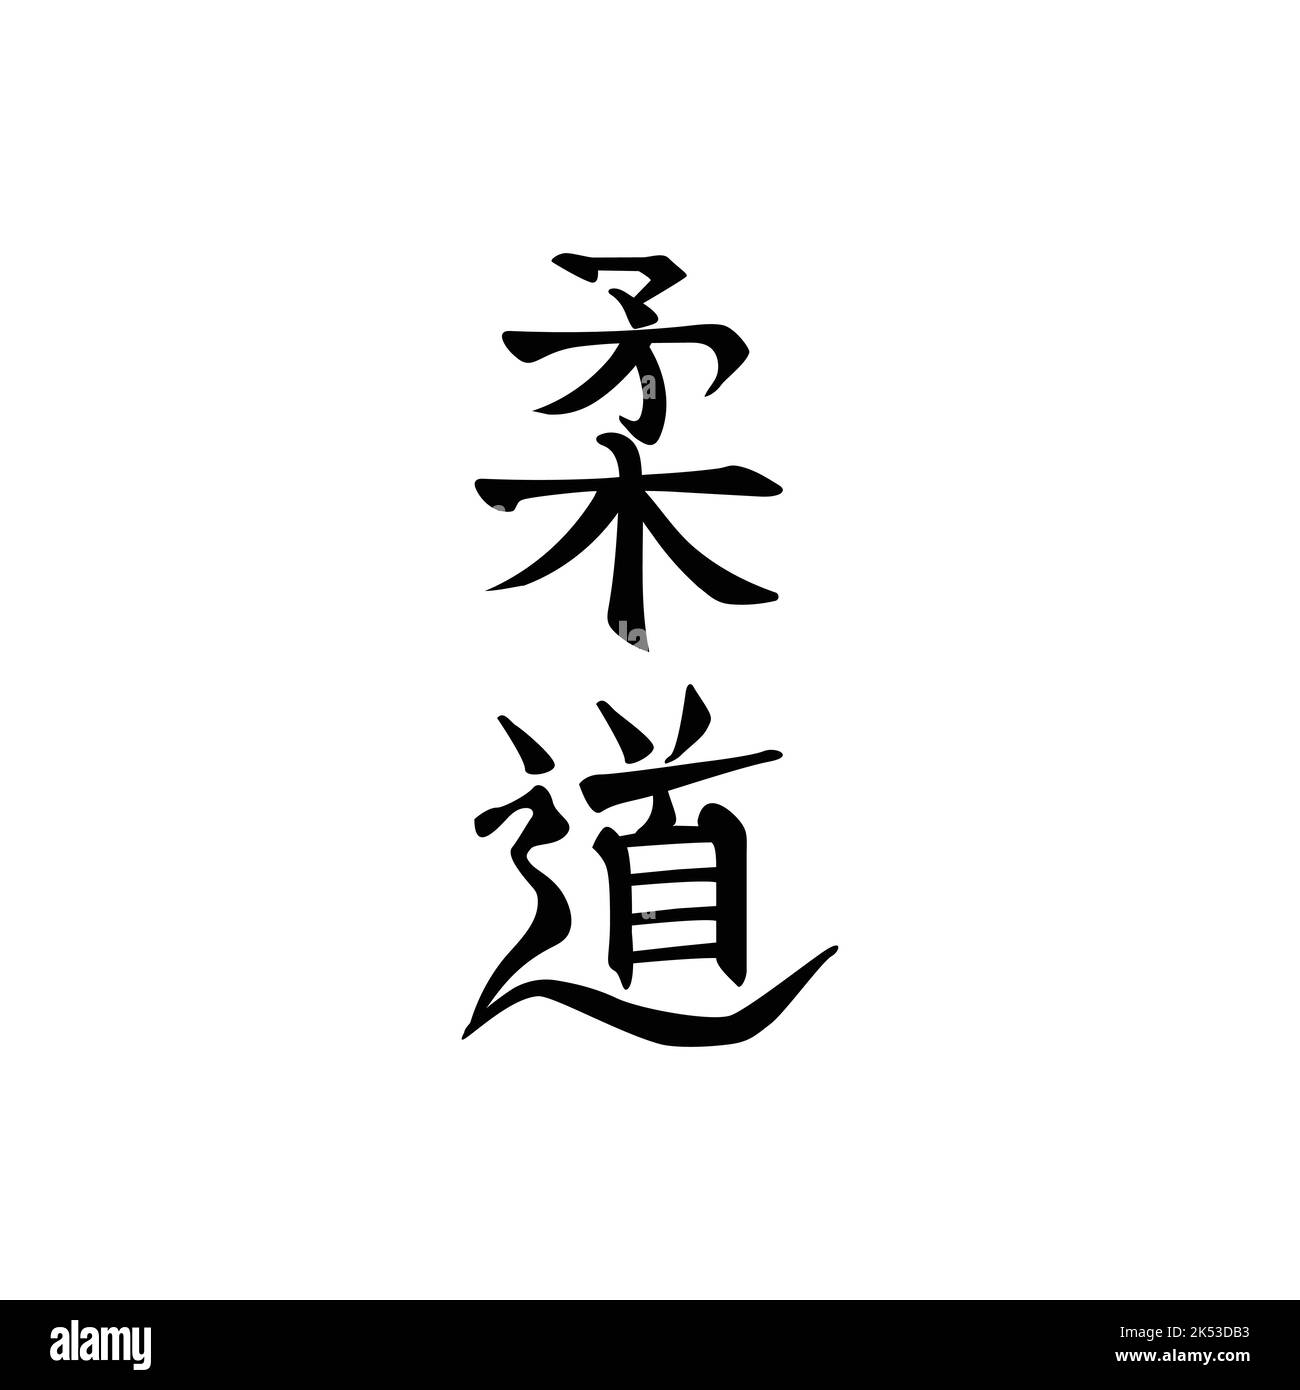 Japanese characters, hieroglyphs, for Judo martial art, black on white background. Hand drawn calligraphic emblem for prints, embroidery, etc. Stock Vector